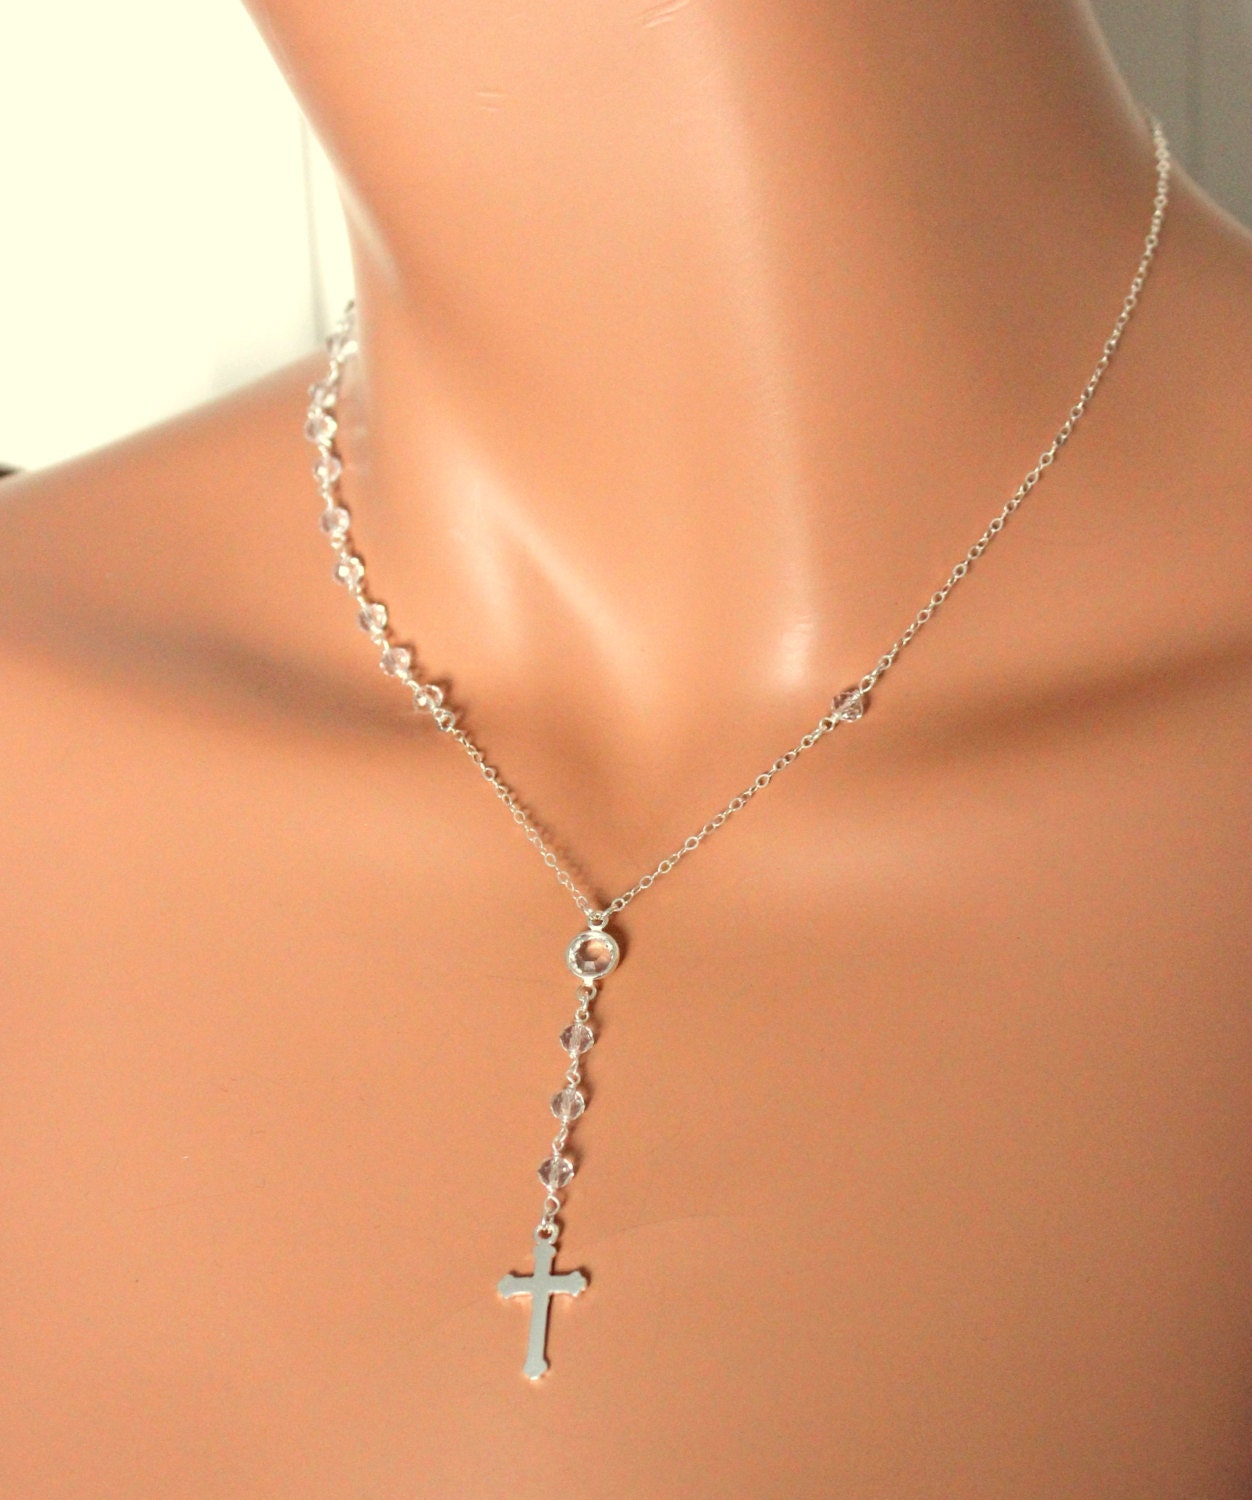 BEST SELLER Thick Silver Chain Choker Heart Lock Necklace Chunky